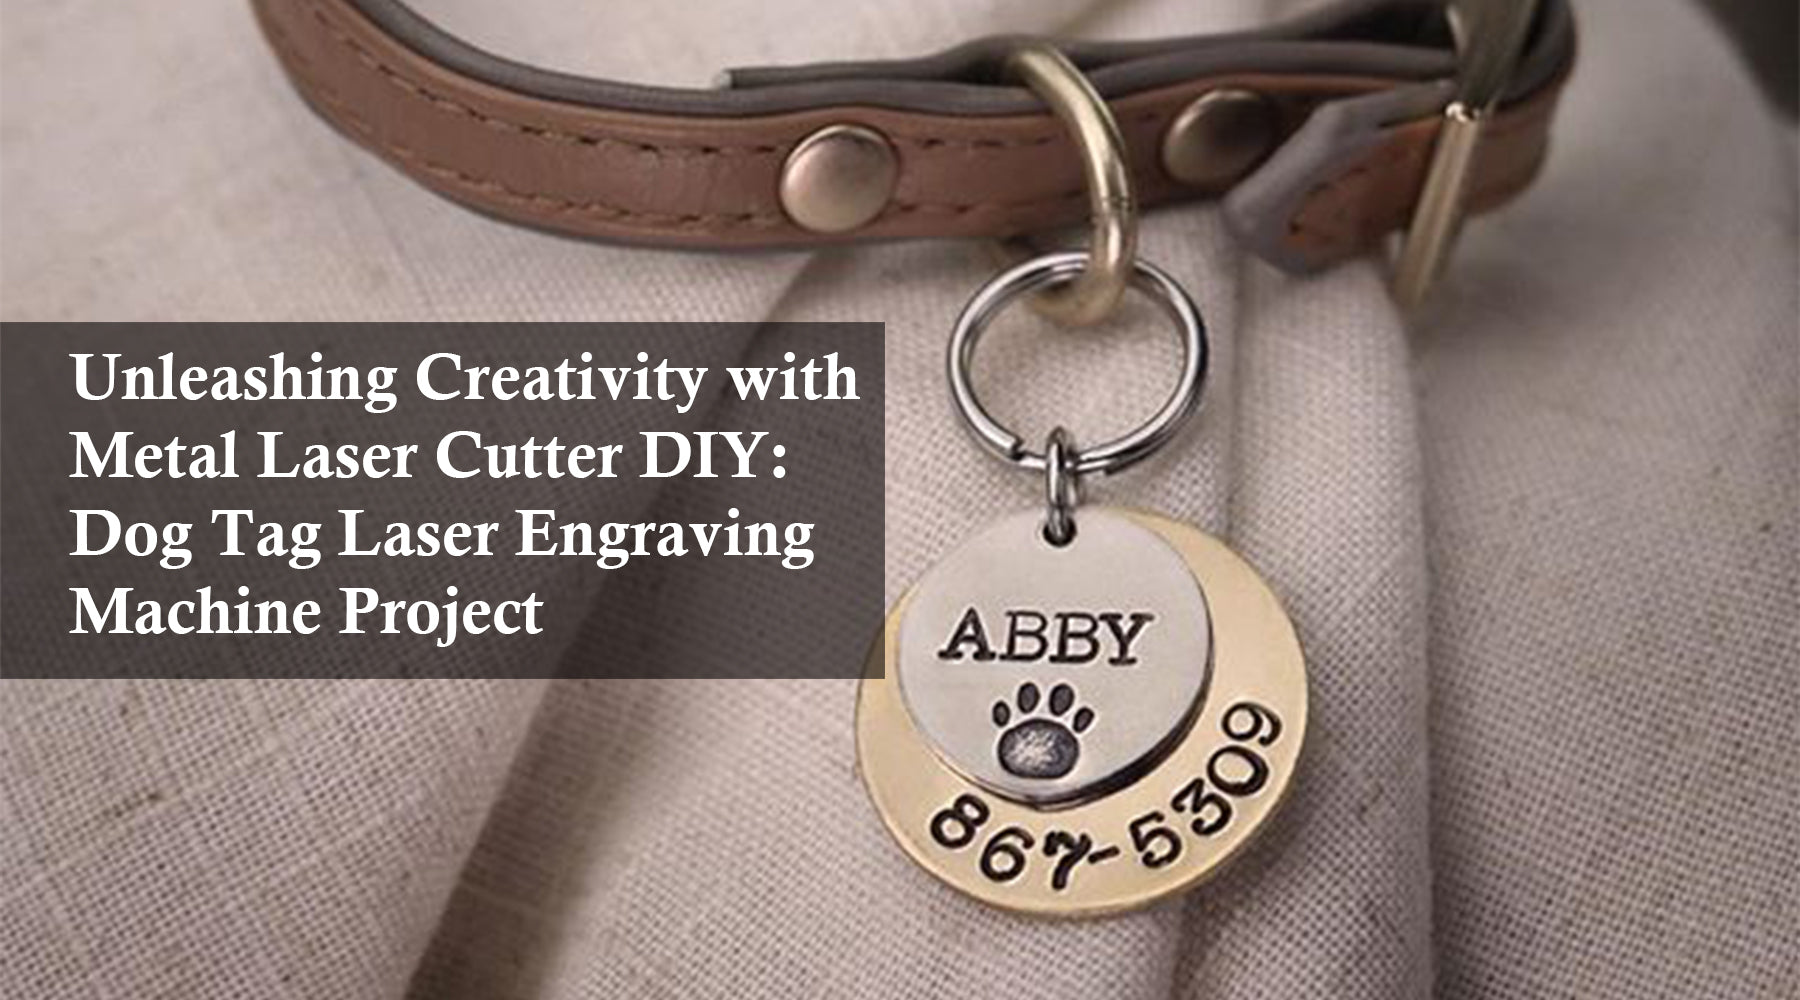 Unleashing Creativity with Metal Laser Cutter DIY: Dog Tag Laser Engraving Machine Project